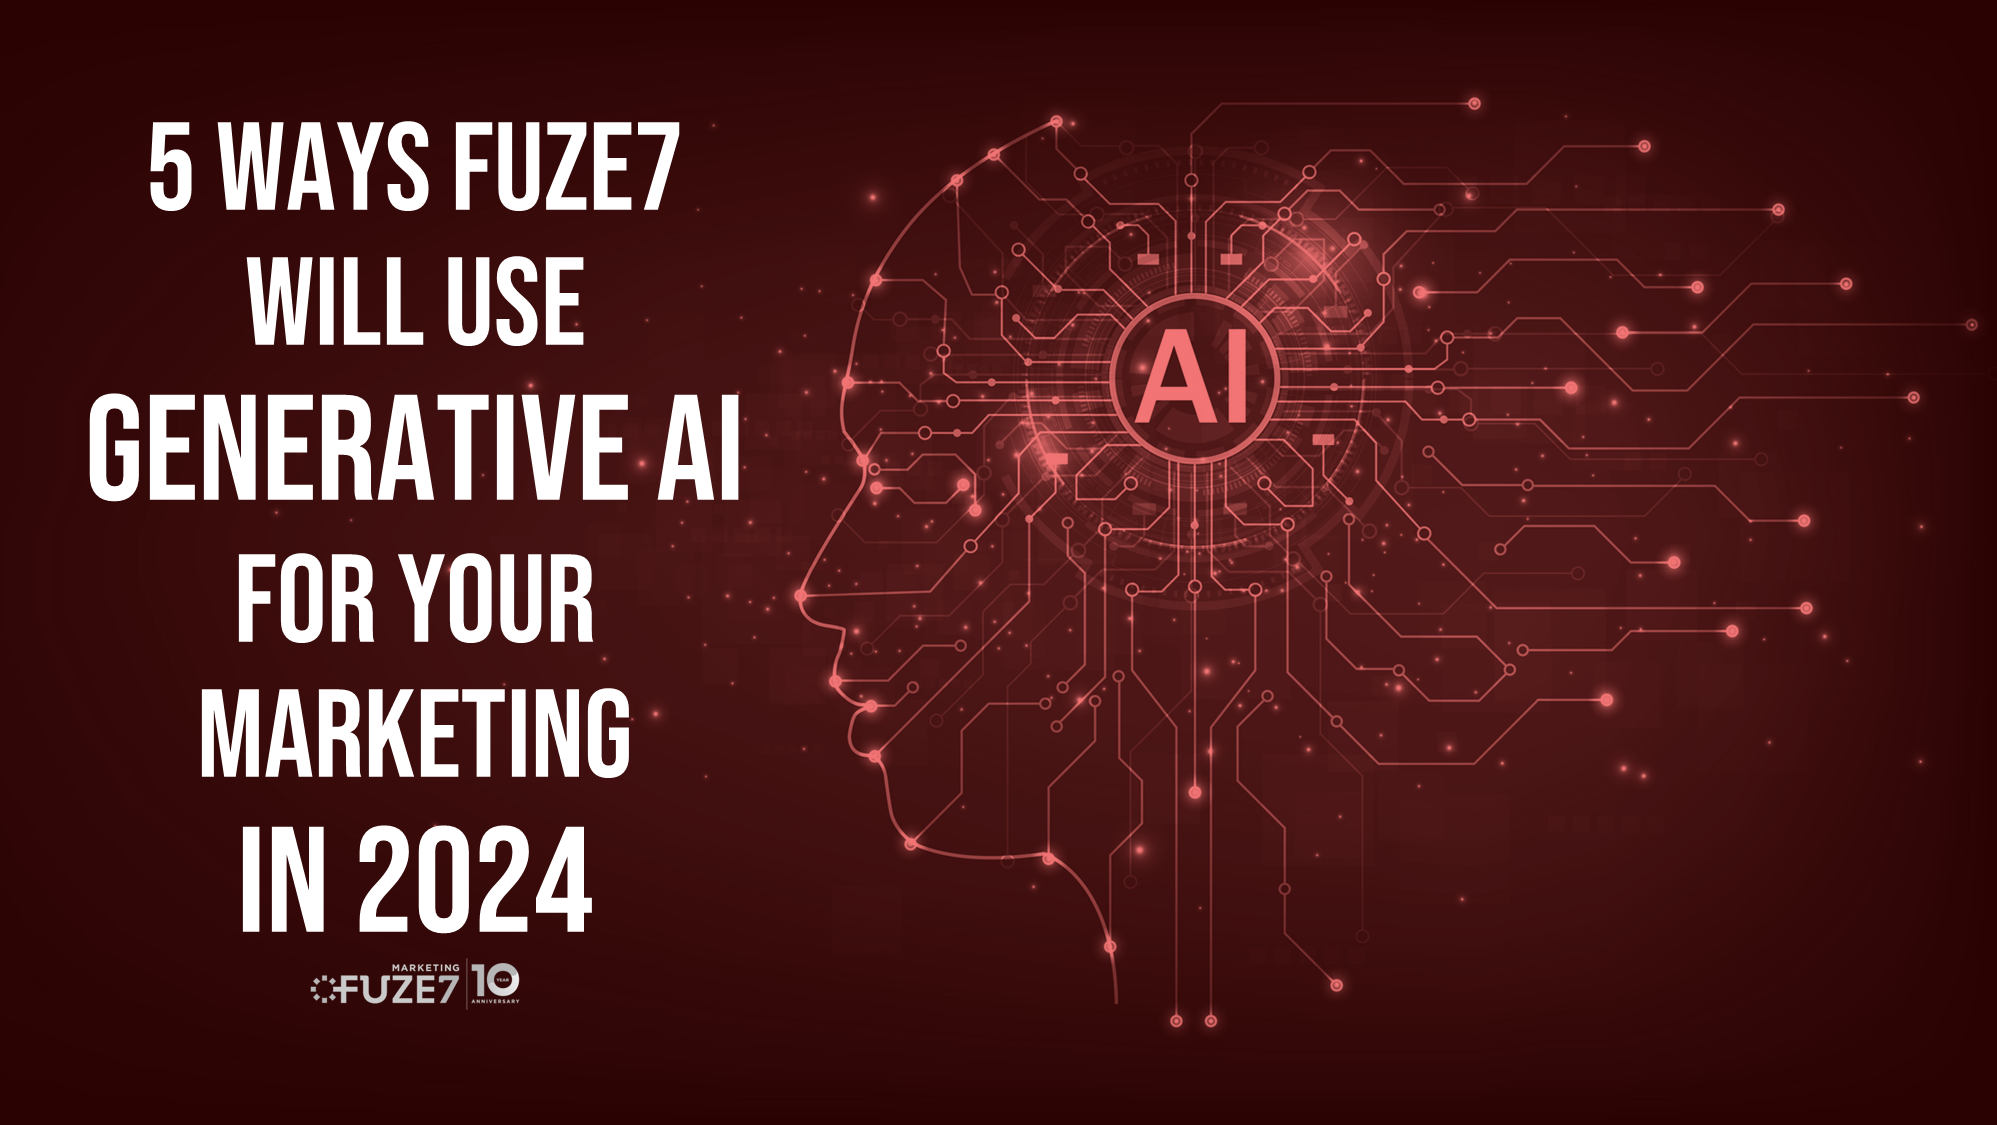 5 ways puzz will use ai for your marketing in 2020.